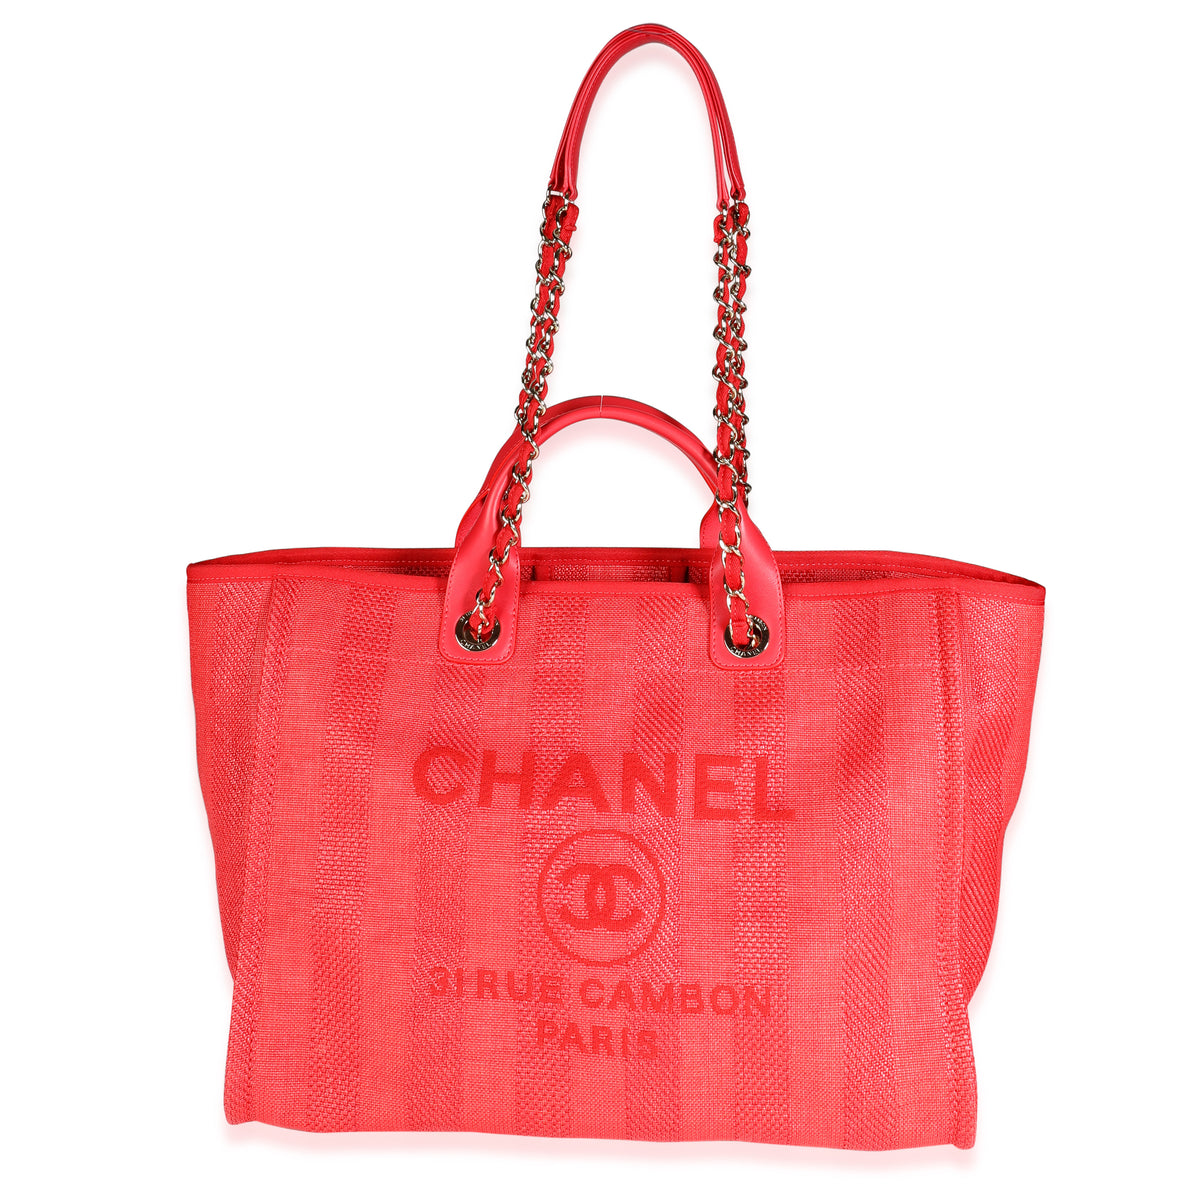 Chanel Red Canvas & Leather Large Deauville Tote, myGemma